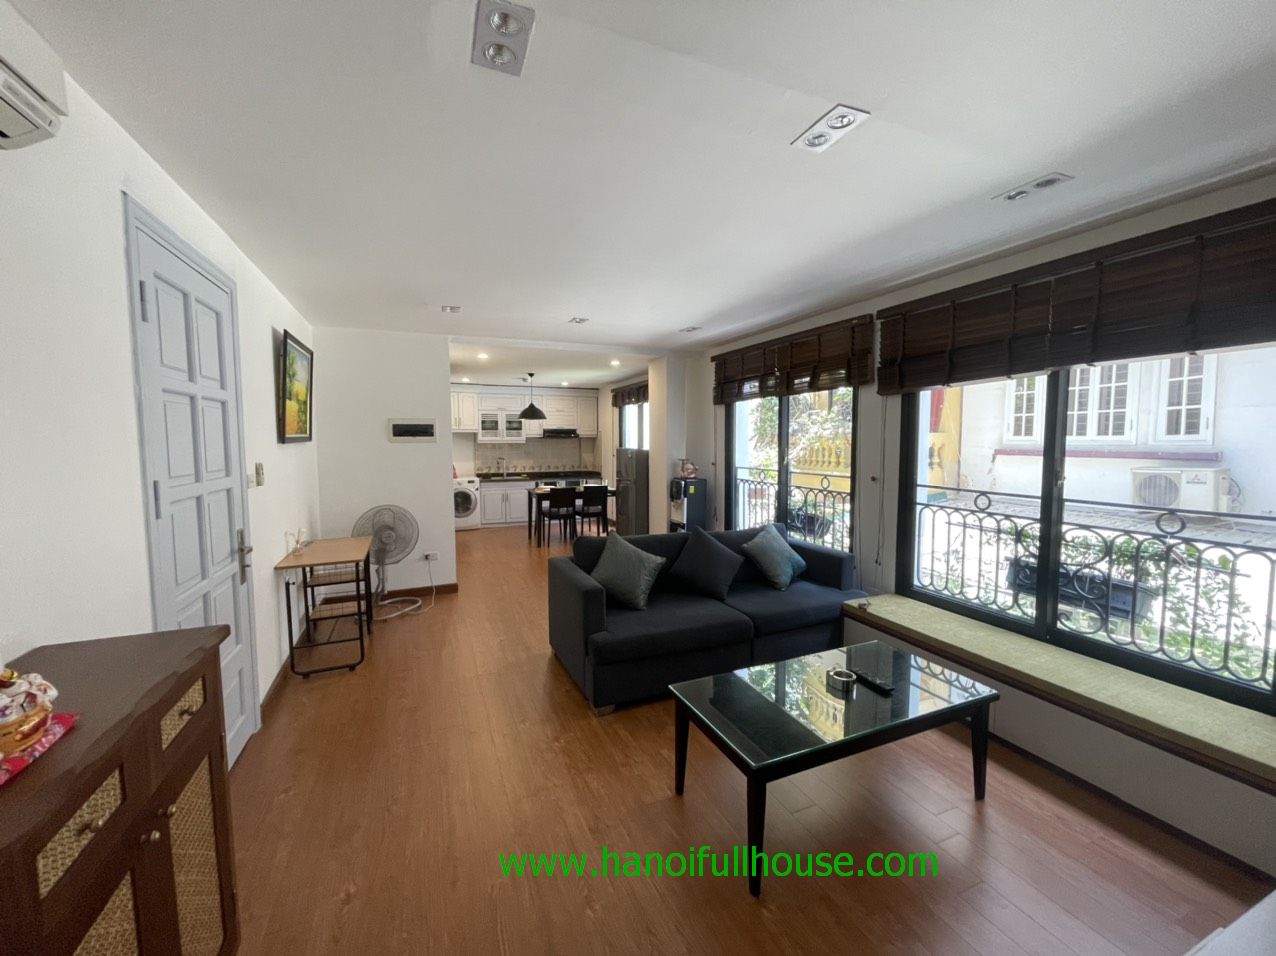 2 bedroom apartment with nice design and full service near West lake for rent 